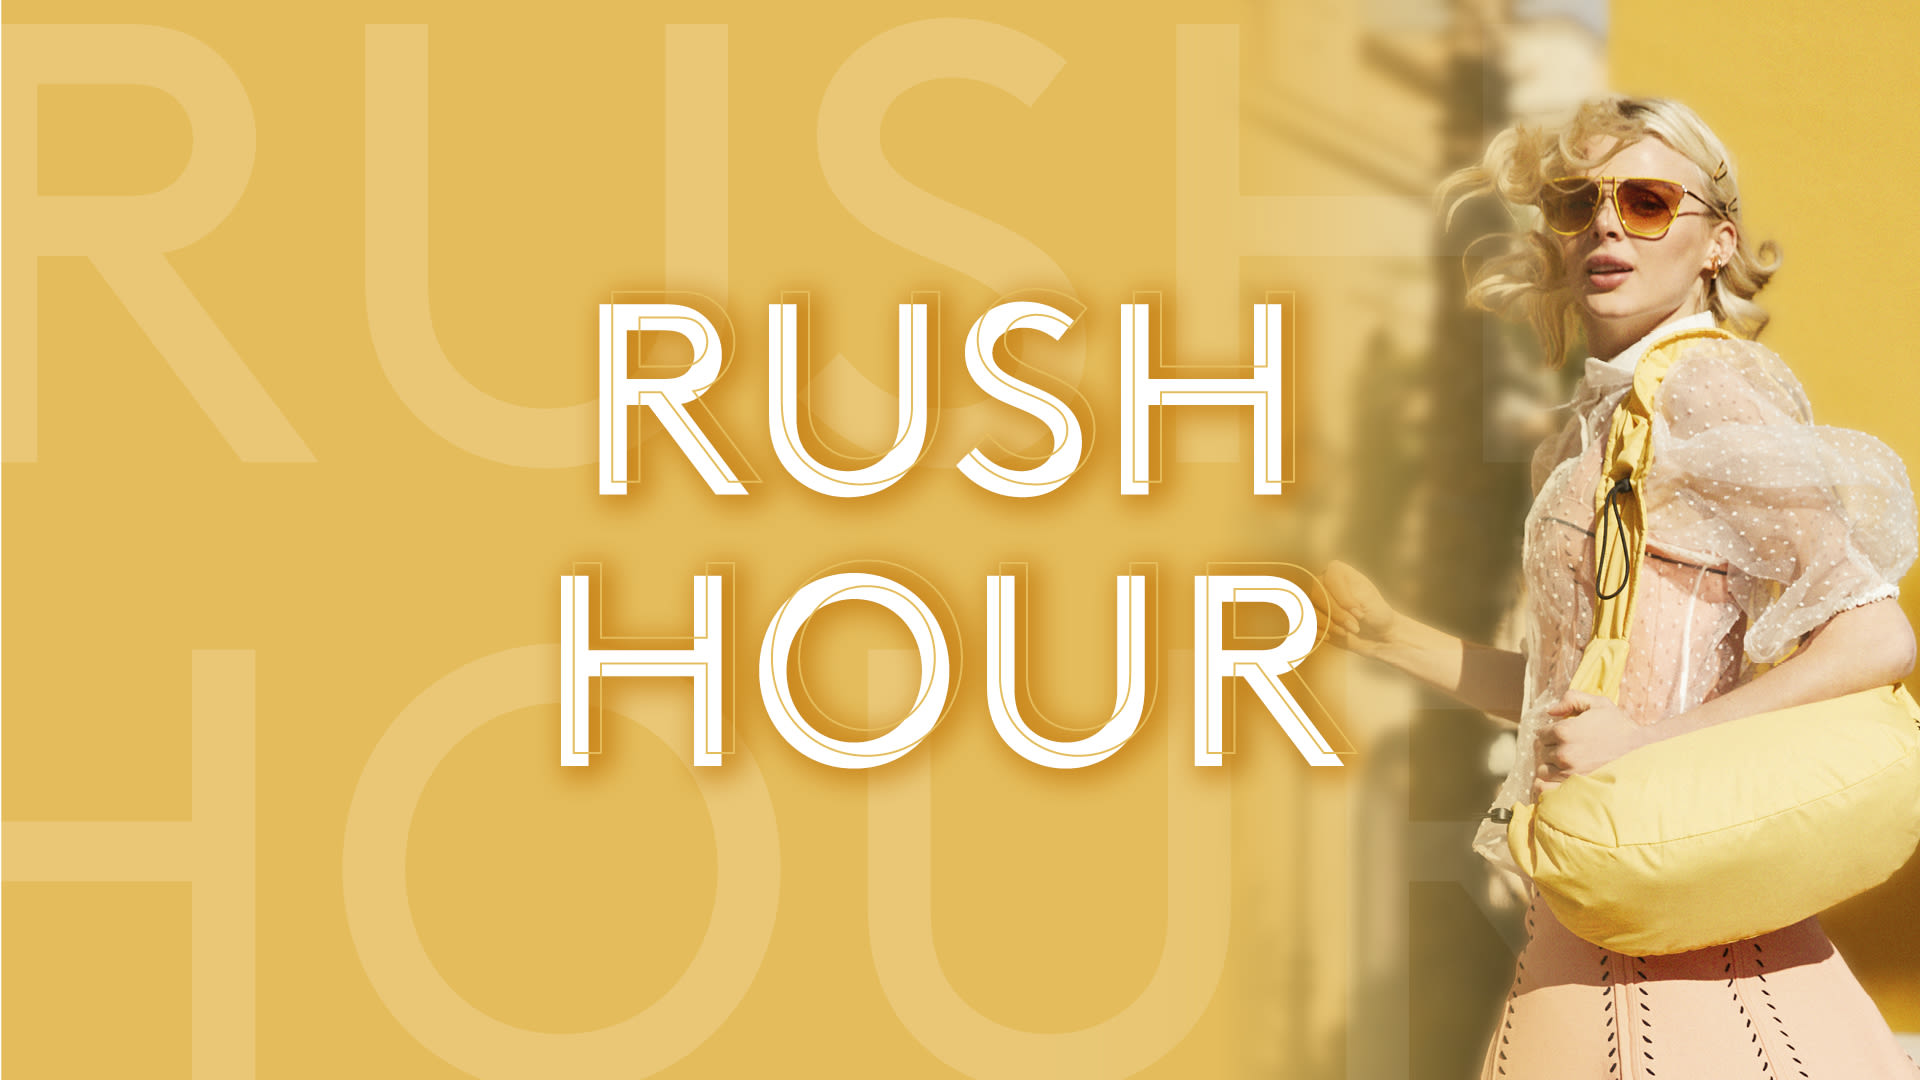 Don't miss Rush Hour!